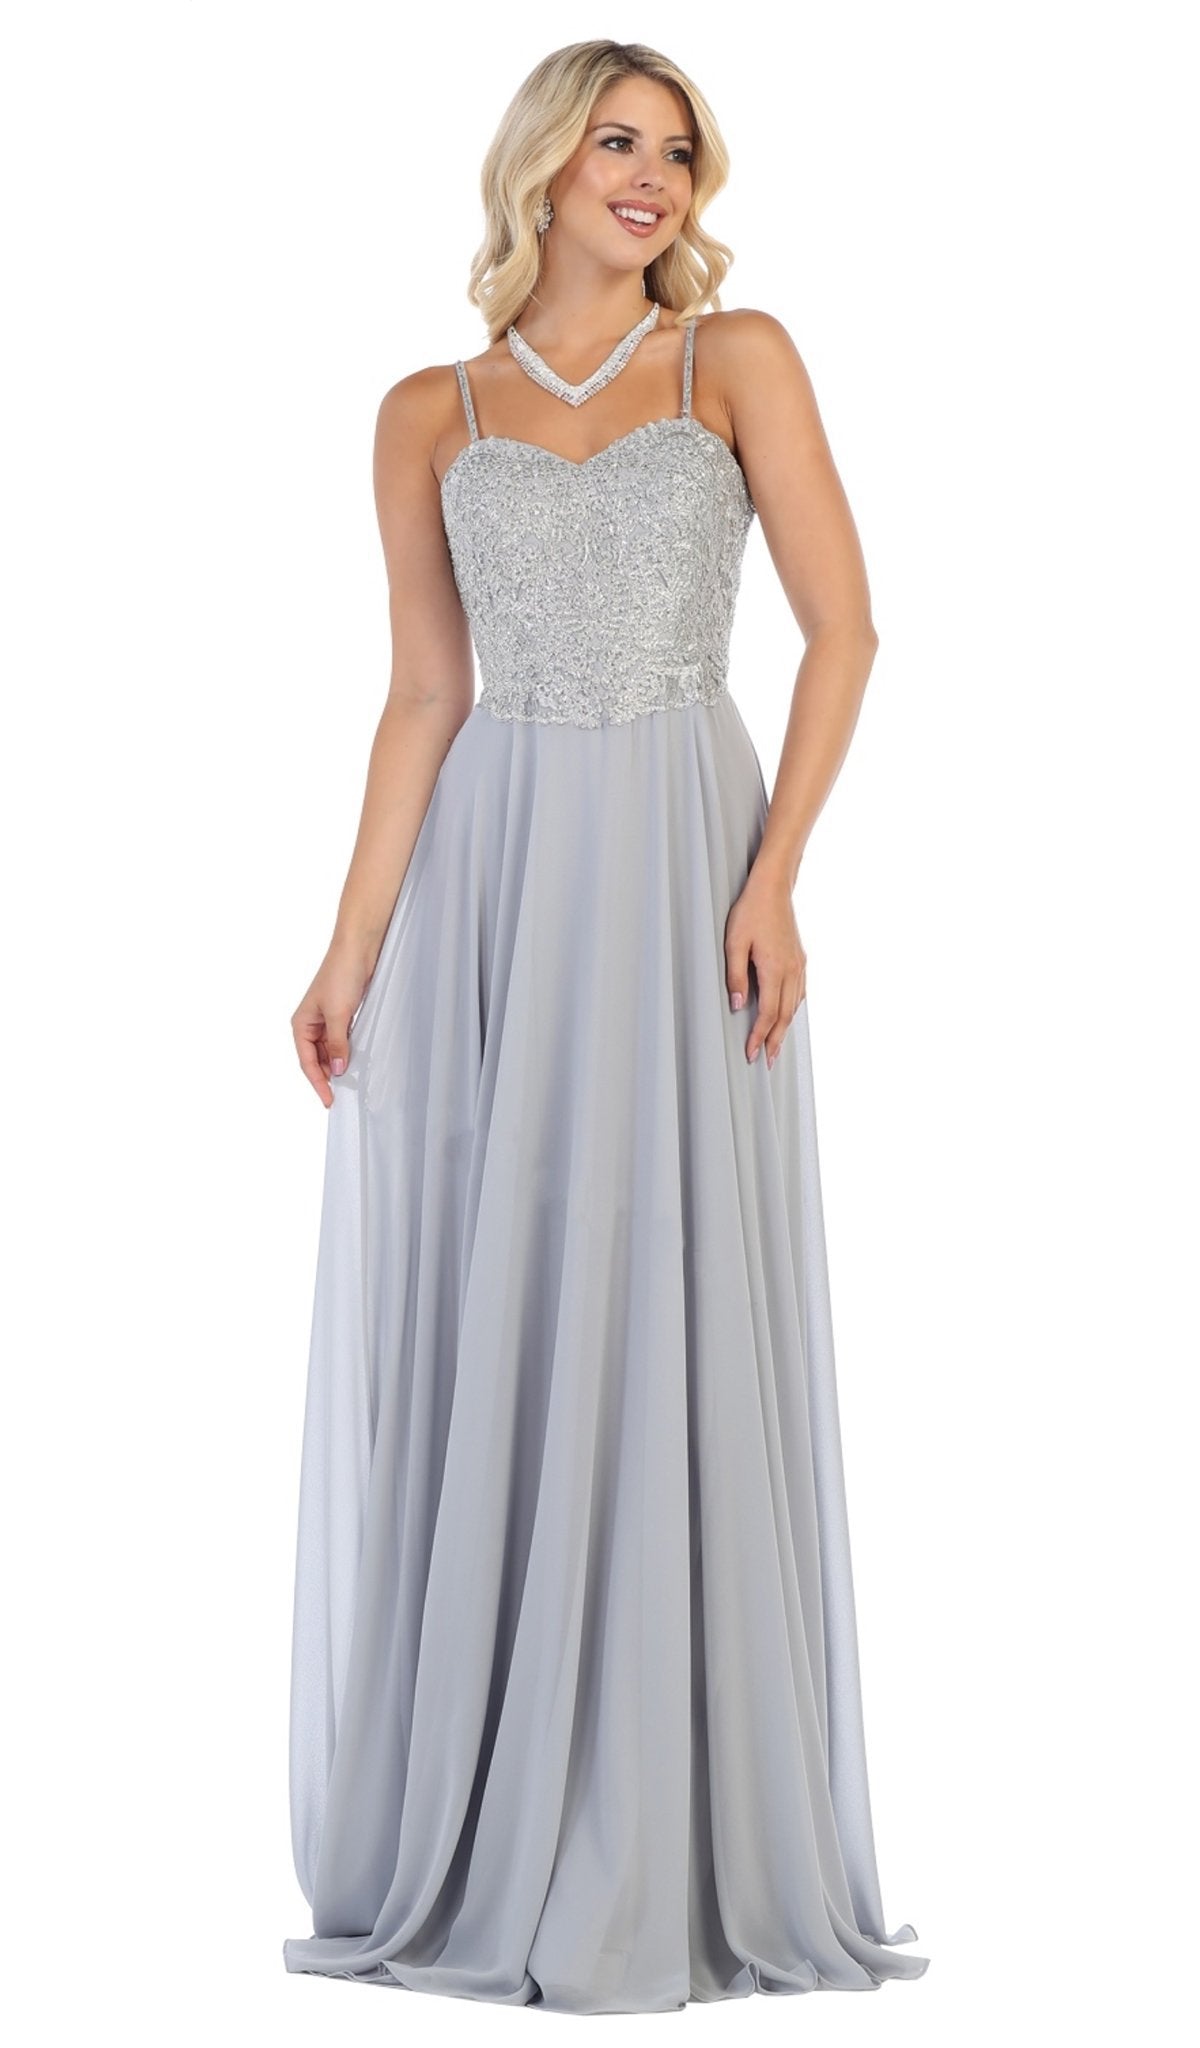 May Queen - MQ1588 Sequin Embellished A-Line Gown Special Occasion Dress 4 / Silver